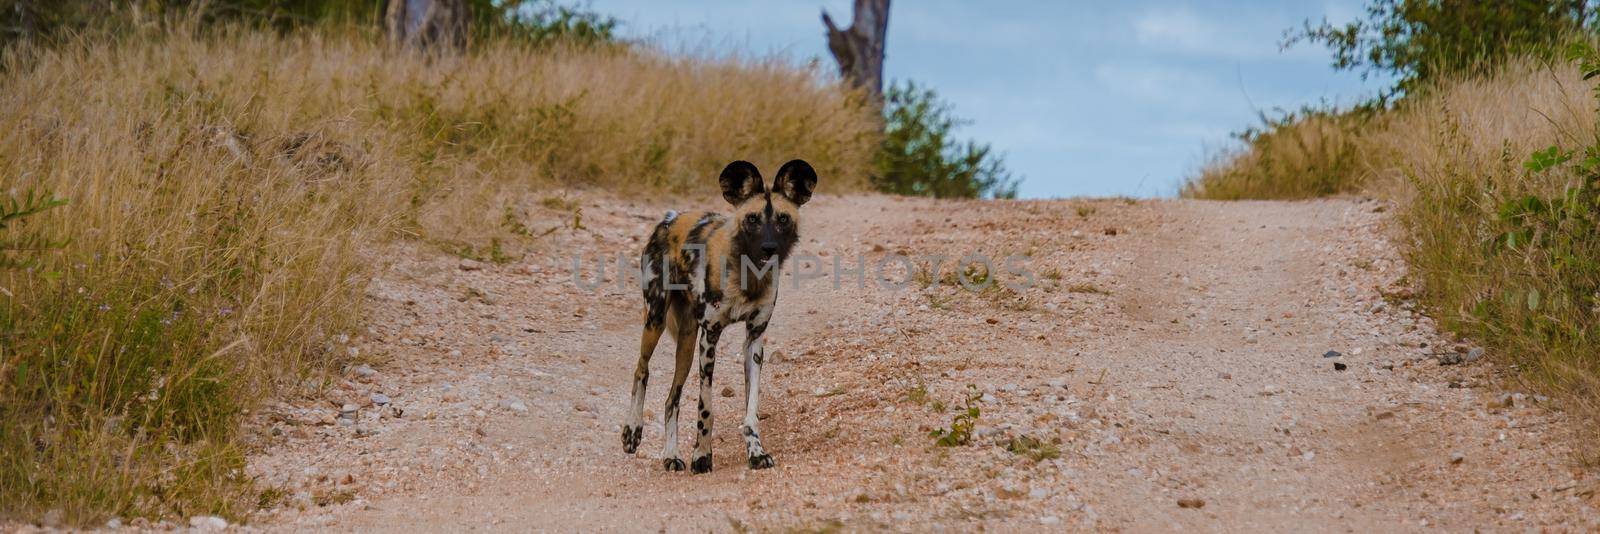 African wild dog during safari game drive in Kruger national park South Africa. close up of an African wild dog in the bush